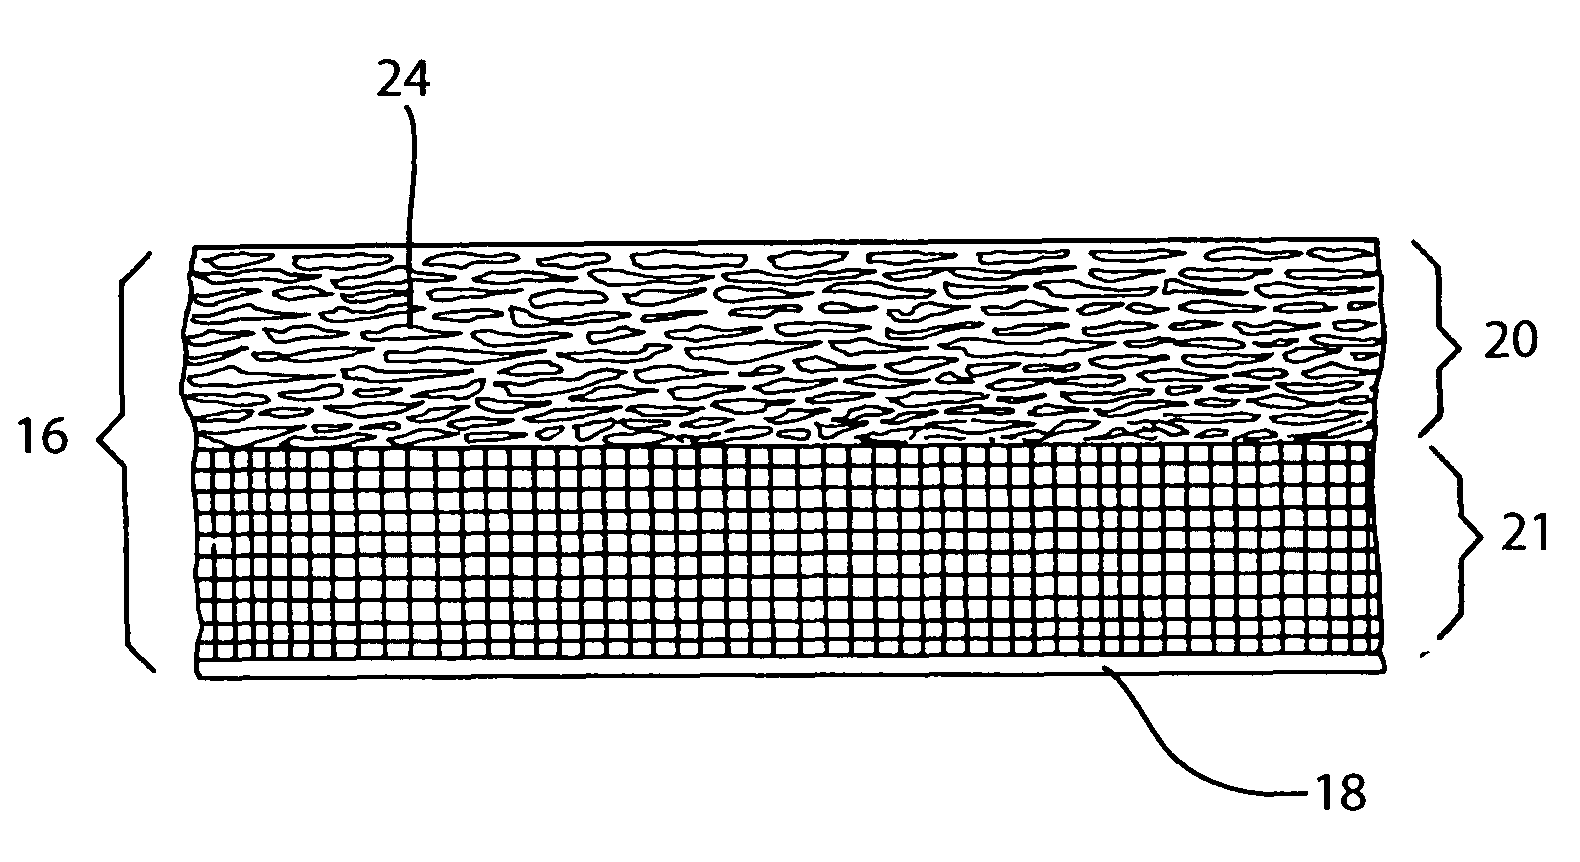 Atomic layer epitaxy processed insulation